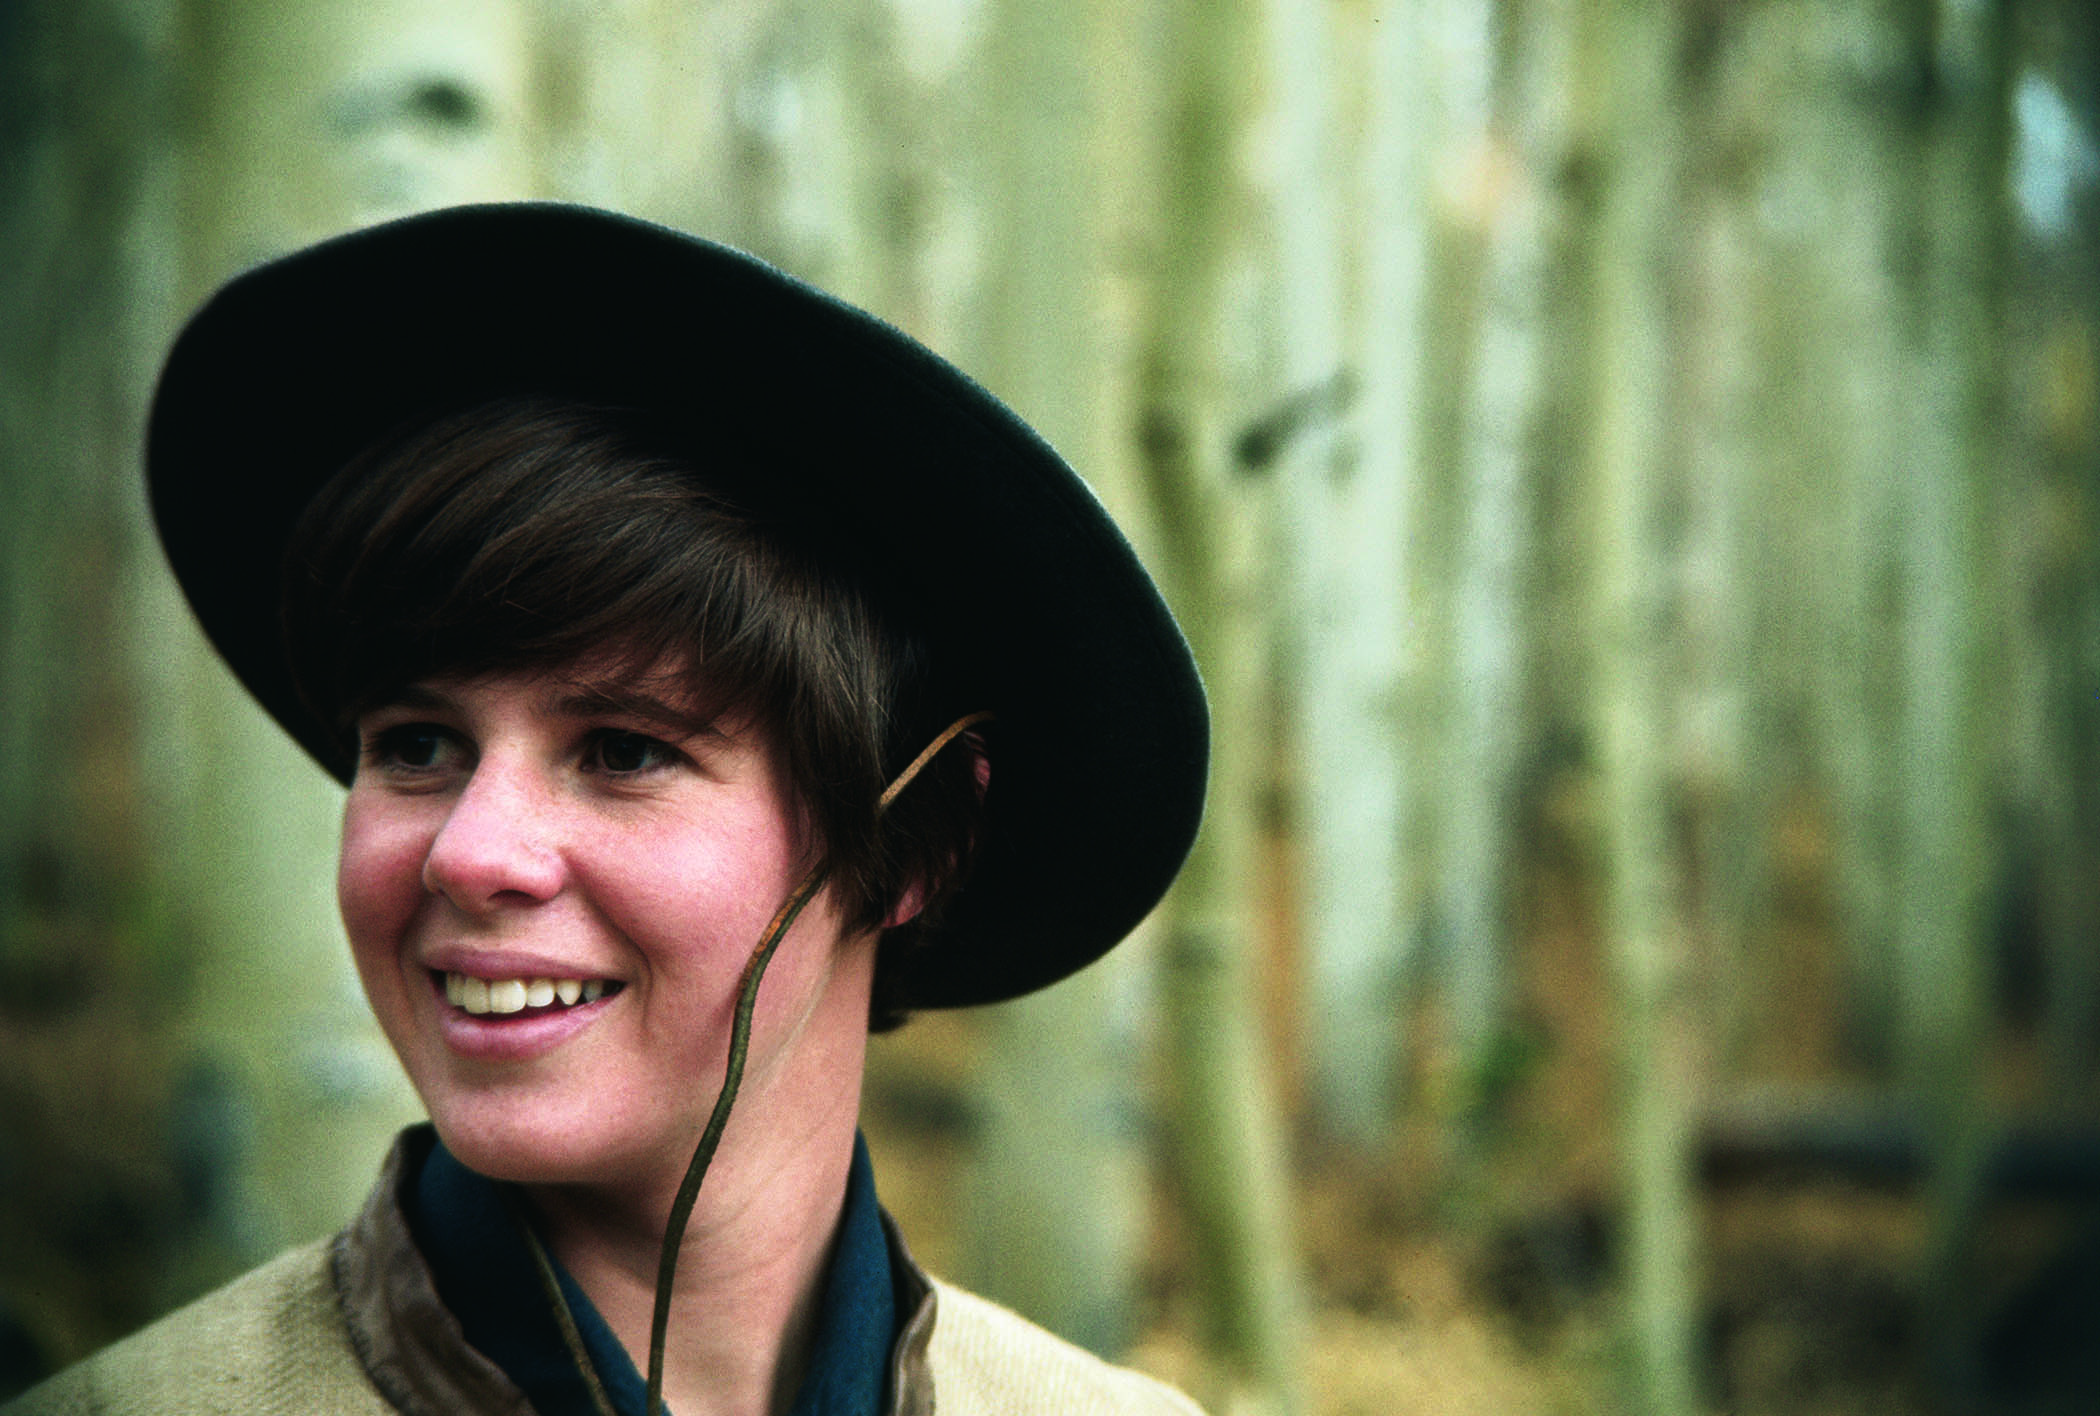 Kim Darby. ©2019 Paramount Pictures. All Rights Reserved.